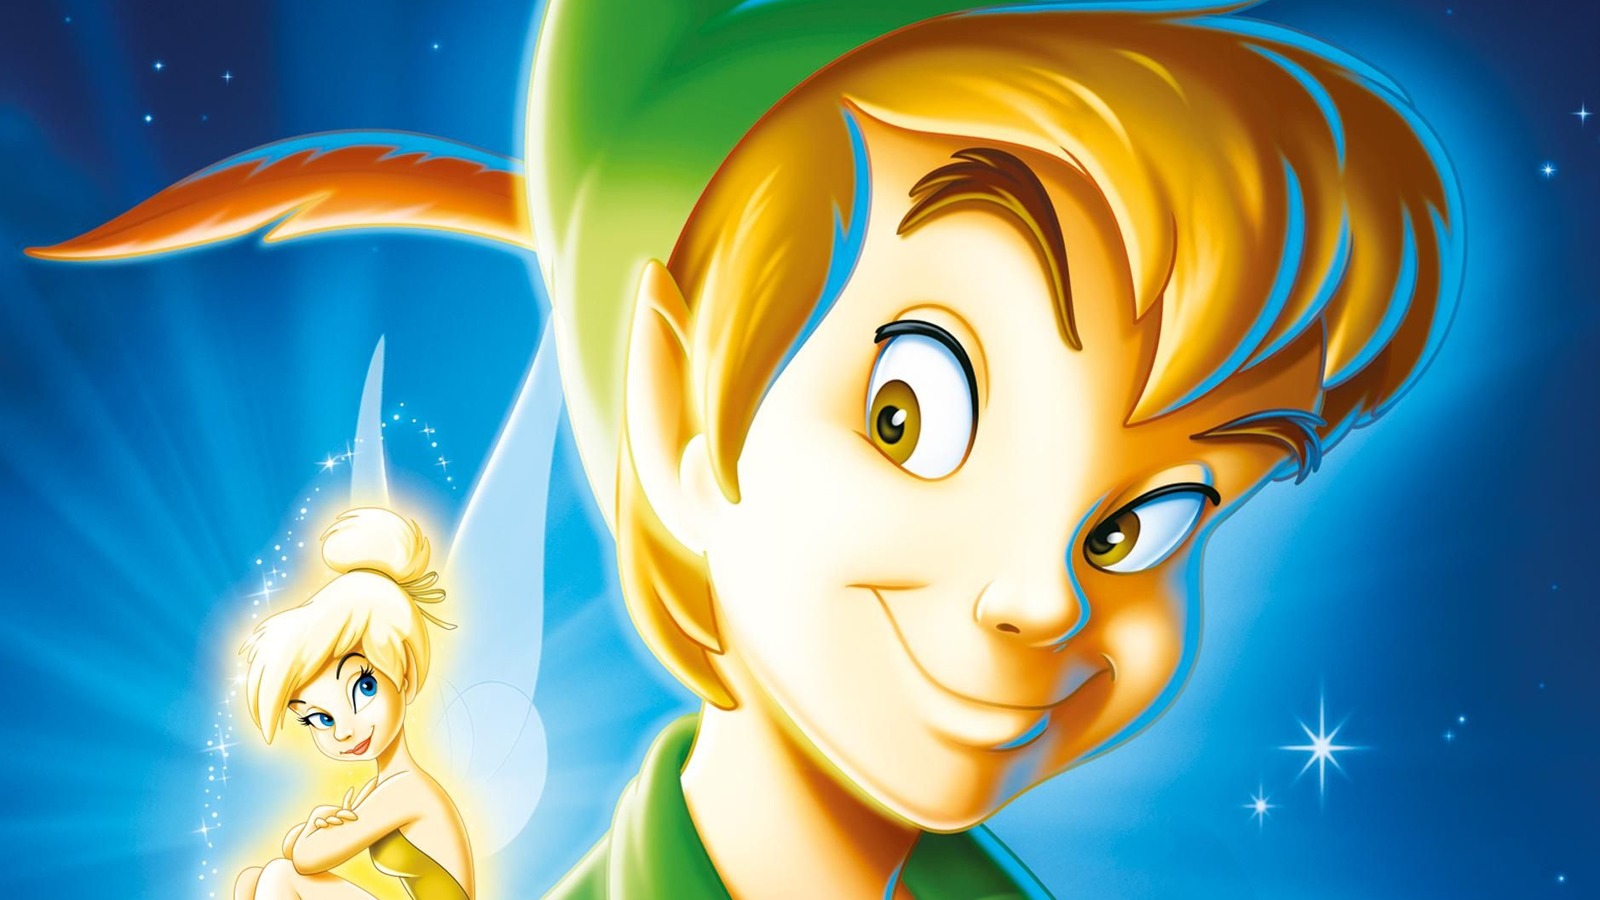 Things Only Adults Notice In Peter Pan